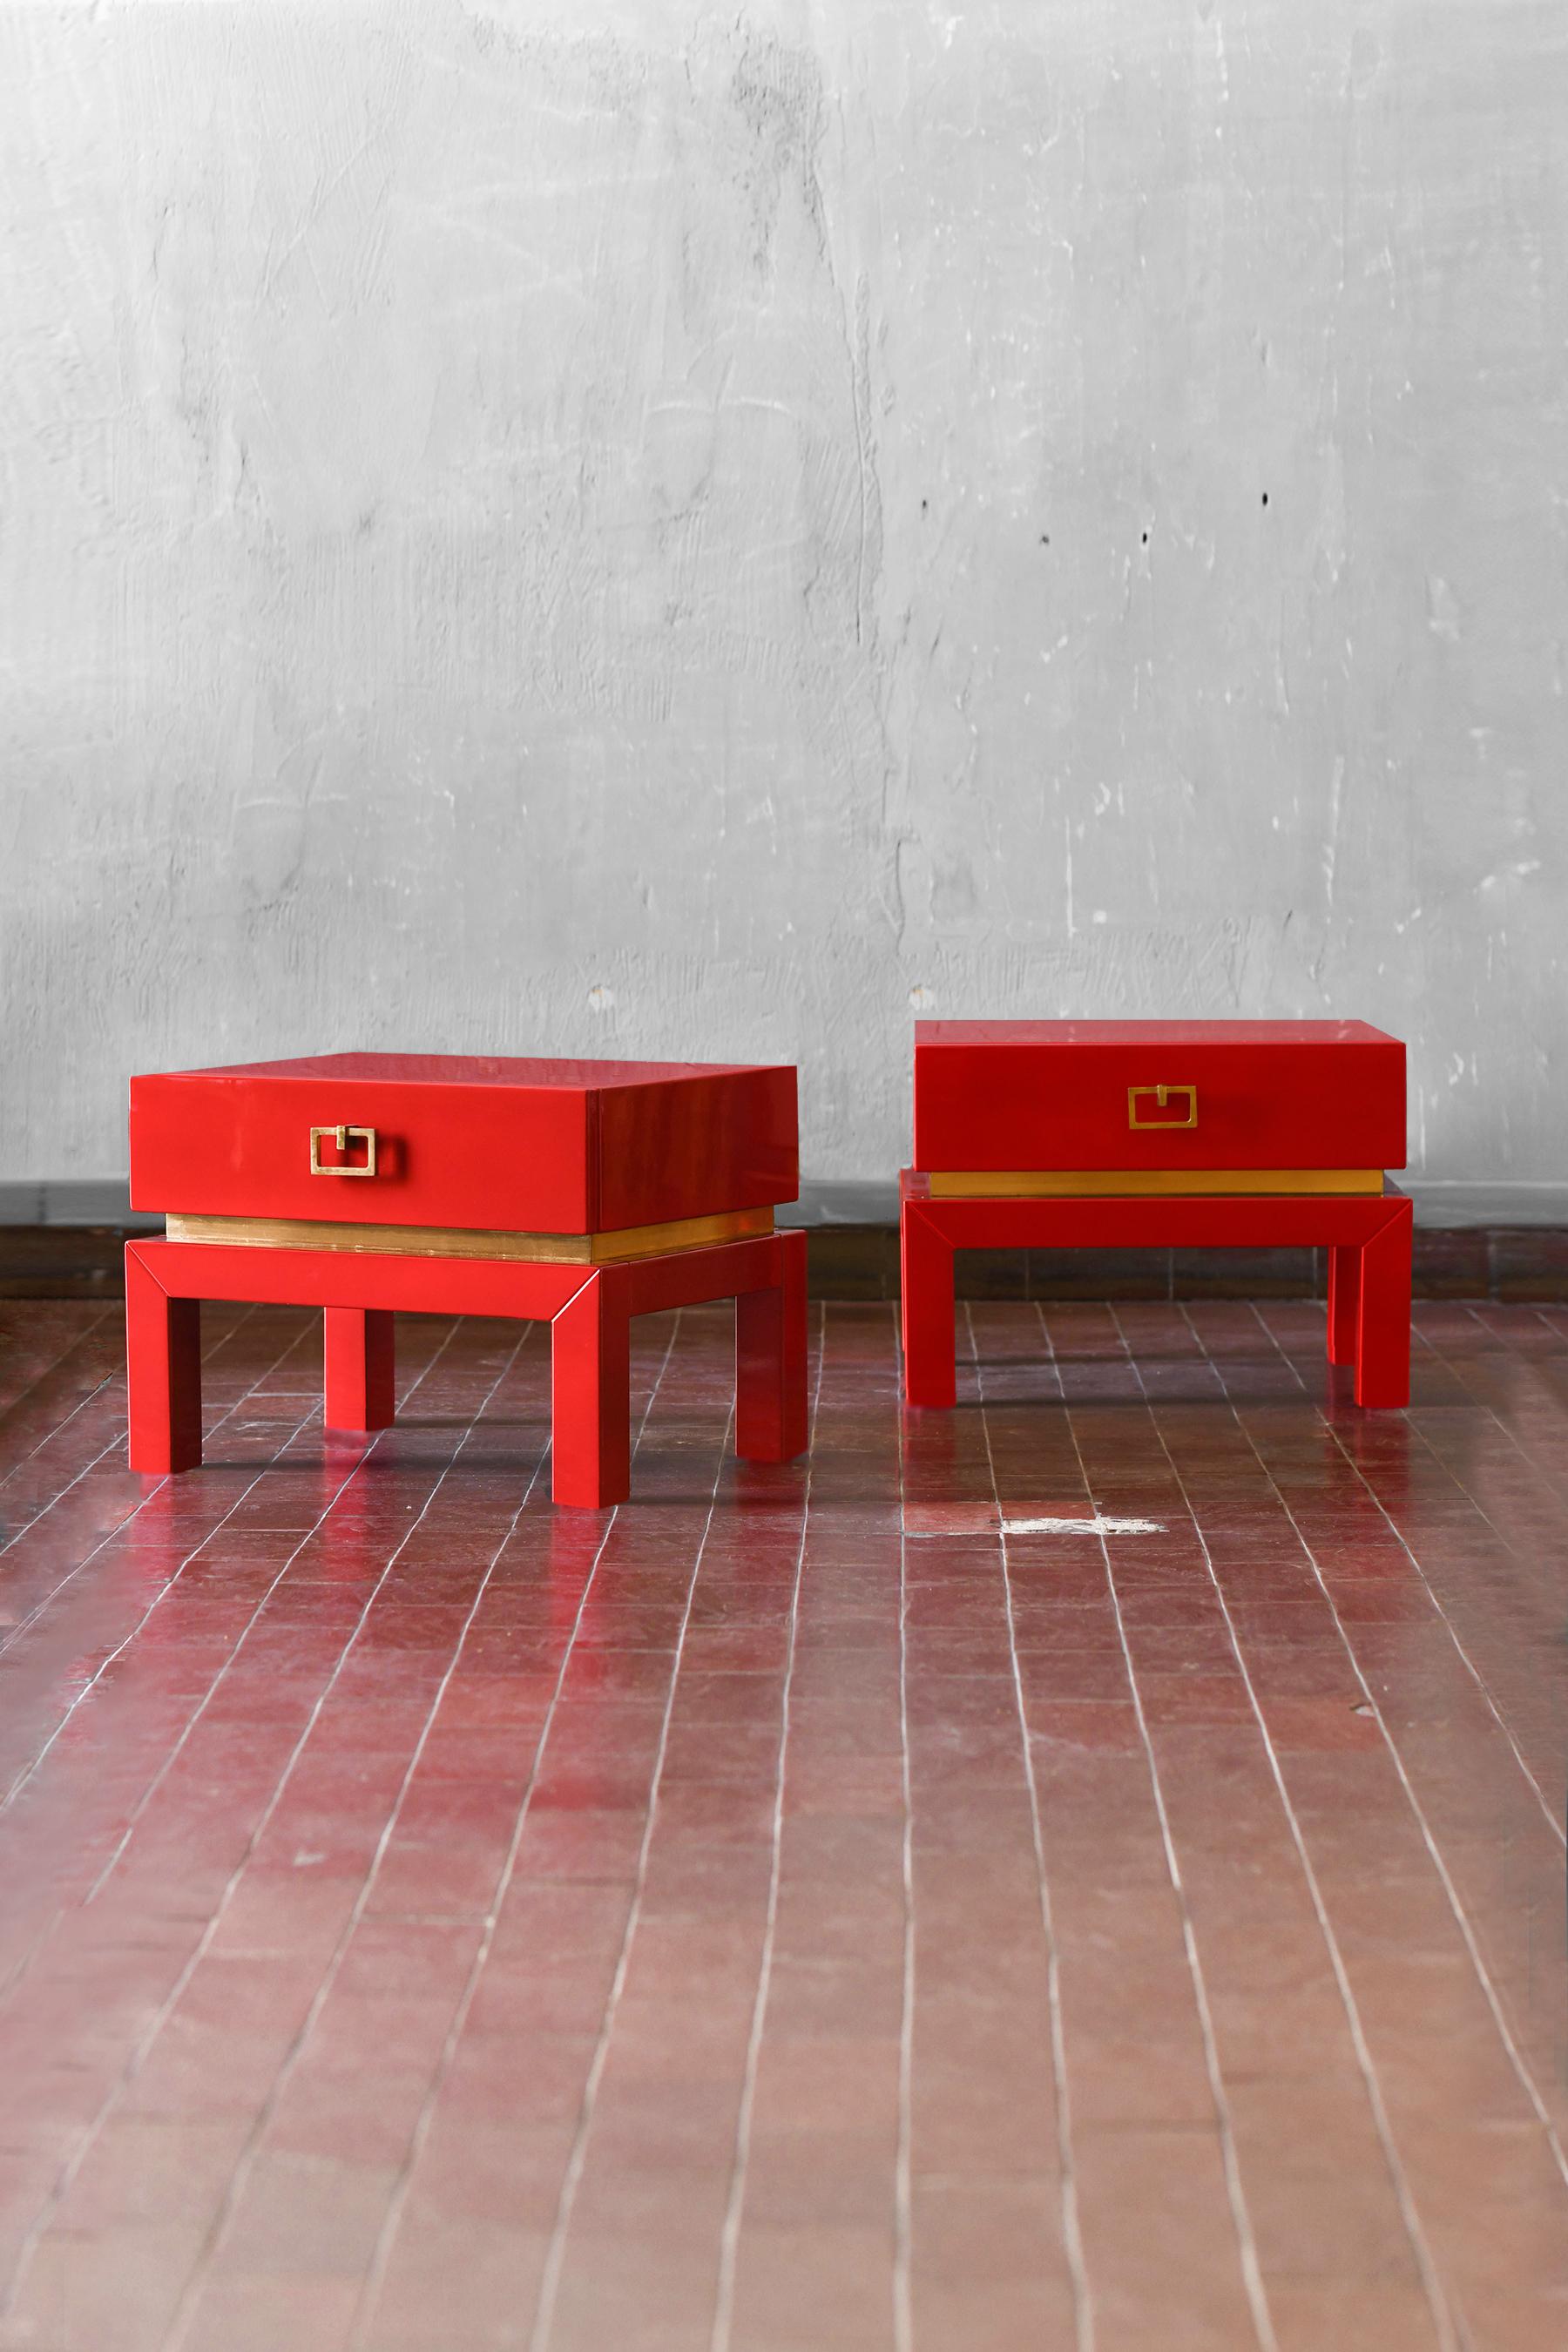 Pair of china red bedside tables with brass details from the 1970s – lacquered series
Product details
Dimensions 58 L x 42 H x 45 D cm